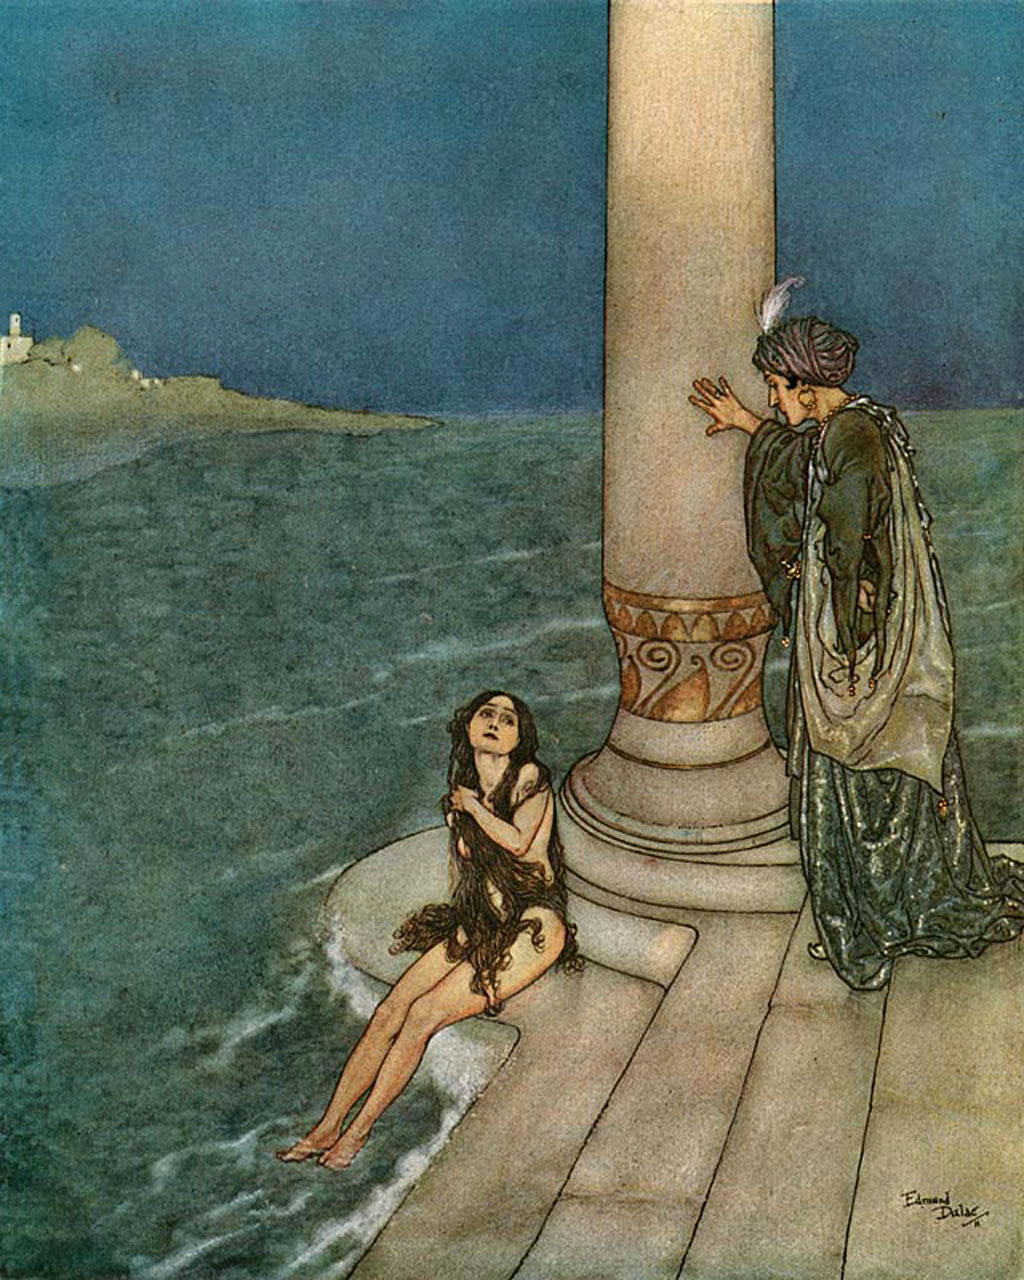 By Edmund Dulac - Gutenberg.org: Stories from Hans Andersen, with illustrations by Edmund Dulac, London, Hodder & Stoughton, Ltd., 1911.